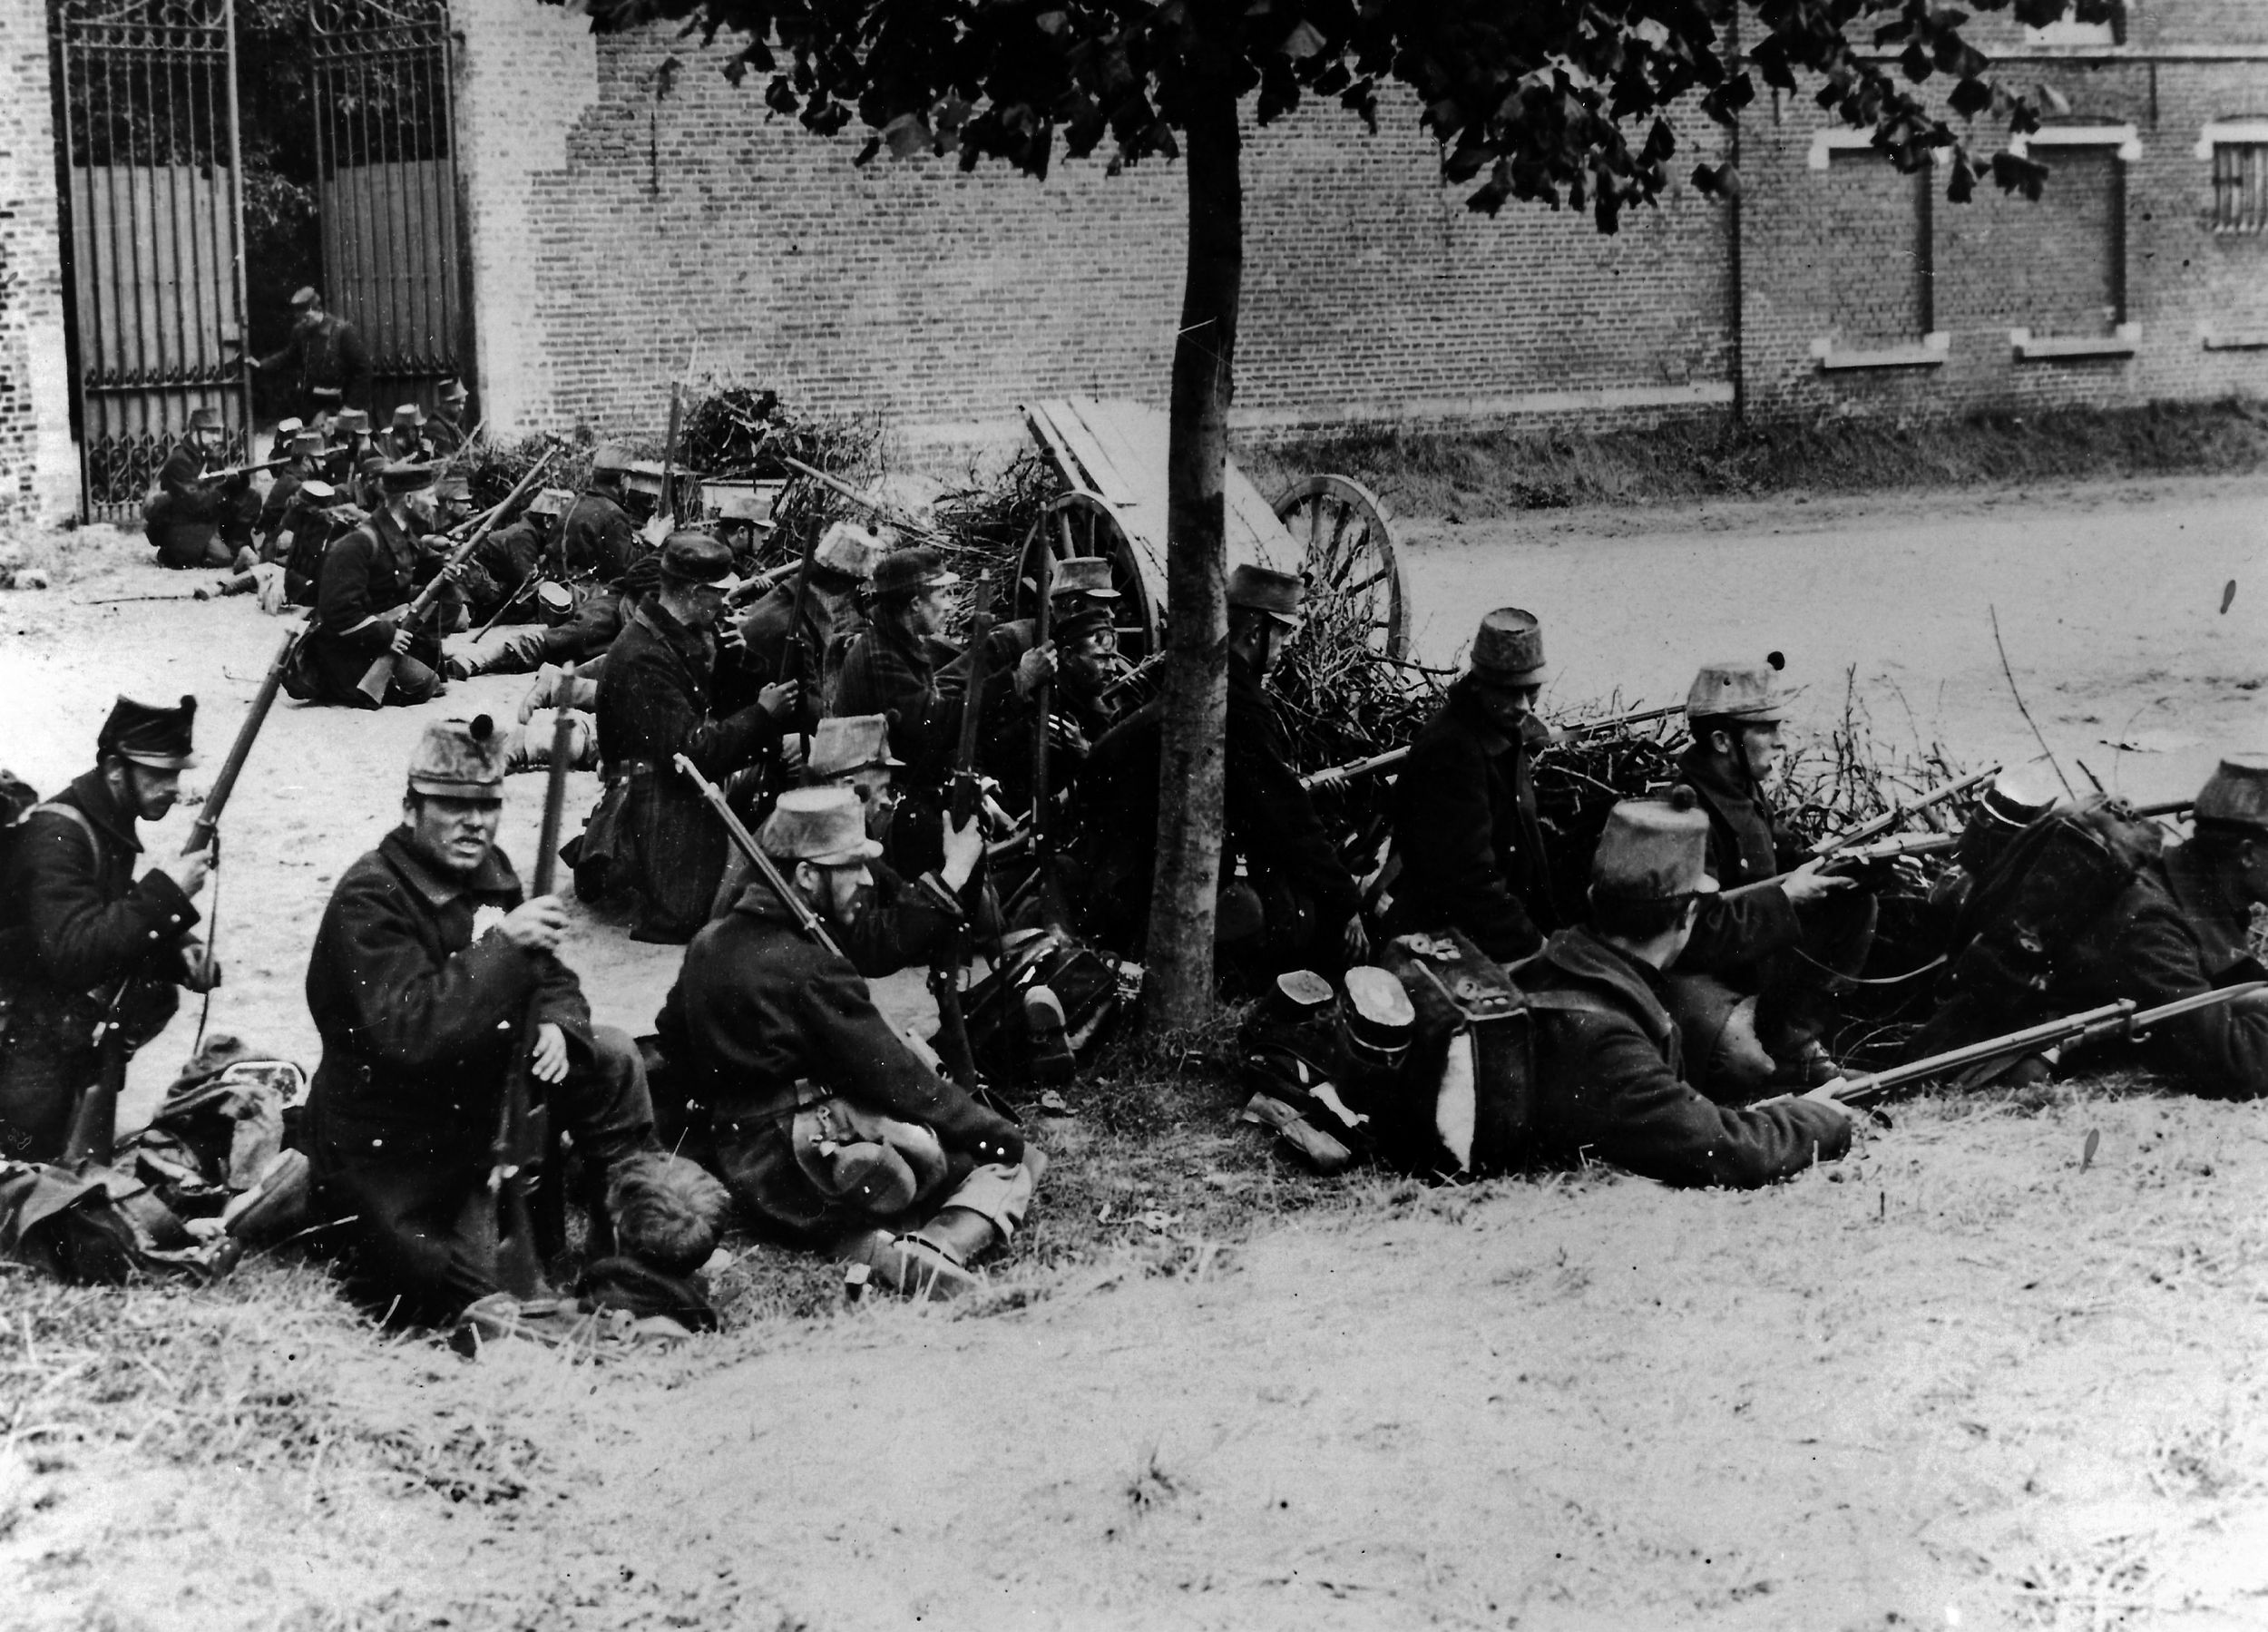 Belgian infantry await the invading Germans at an improvised roadblock. Vastly overmatched, the Belgians fought valiantly to defend their homeland.